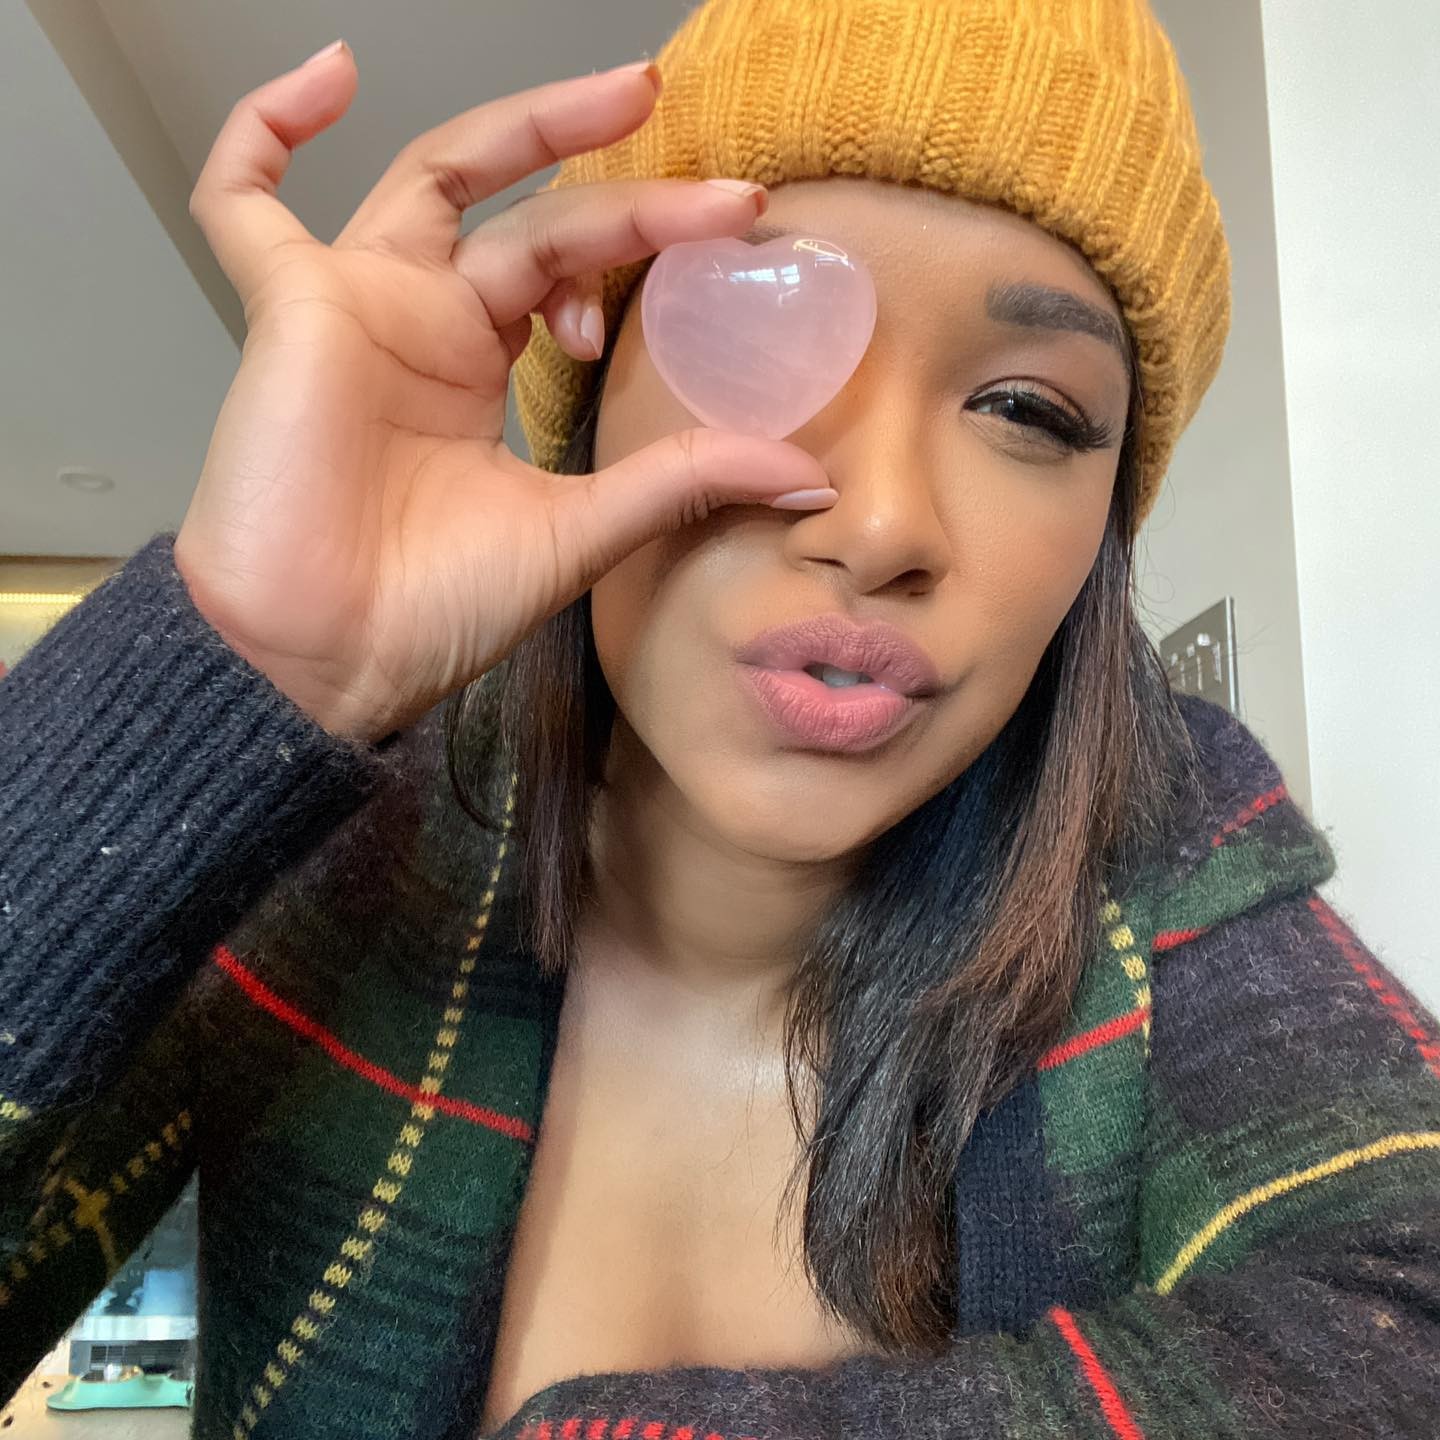 Candice Patton Selfie TheFappening.Pro 4 - Candice Patton Nude Iris West-Allen From “Flash” And “Legends of Tomorrow” (74 Photos)